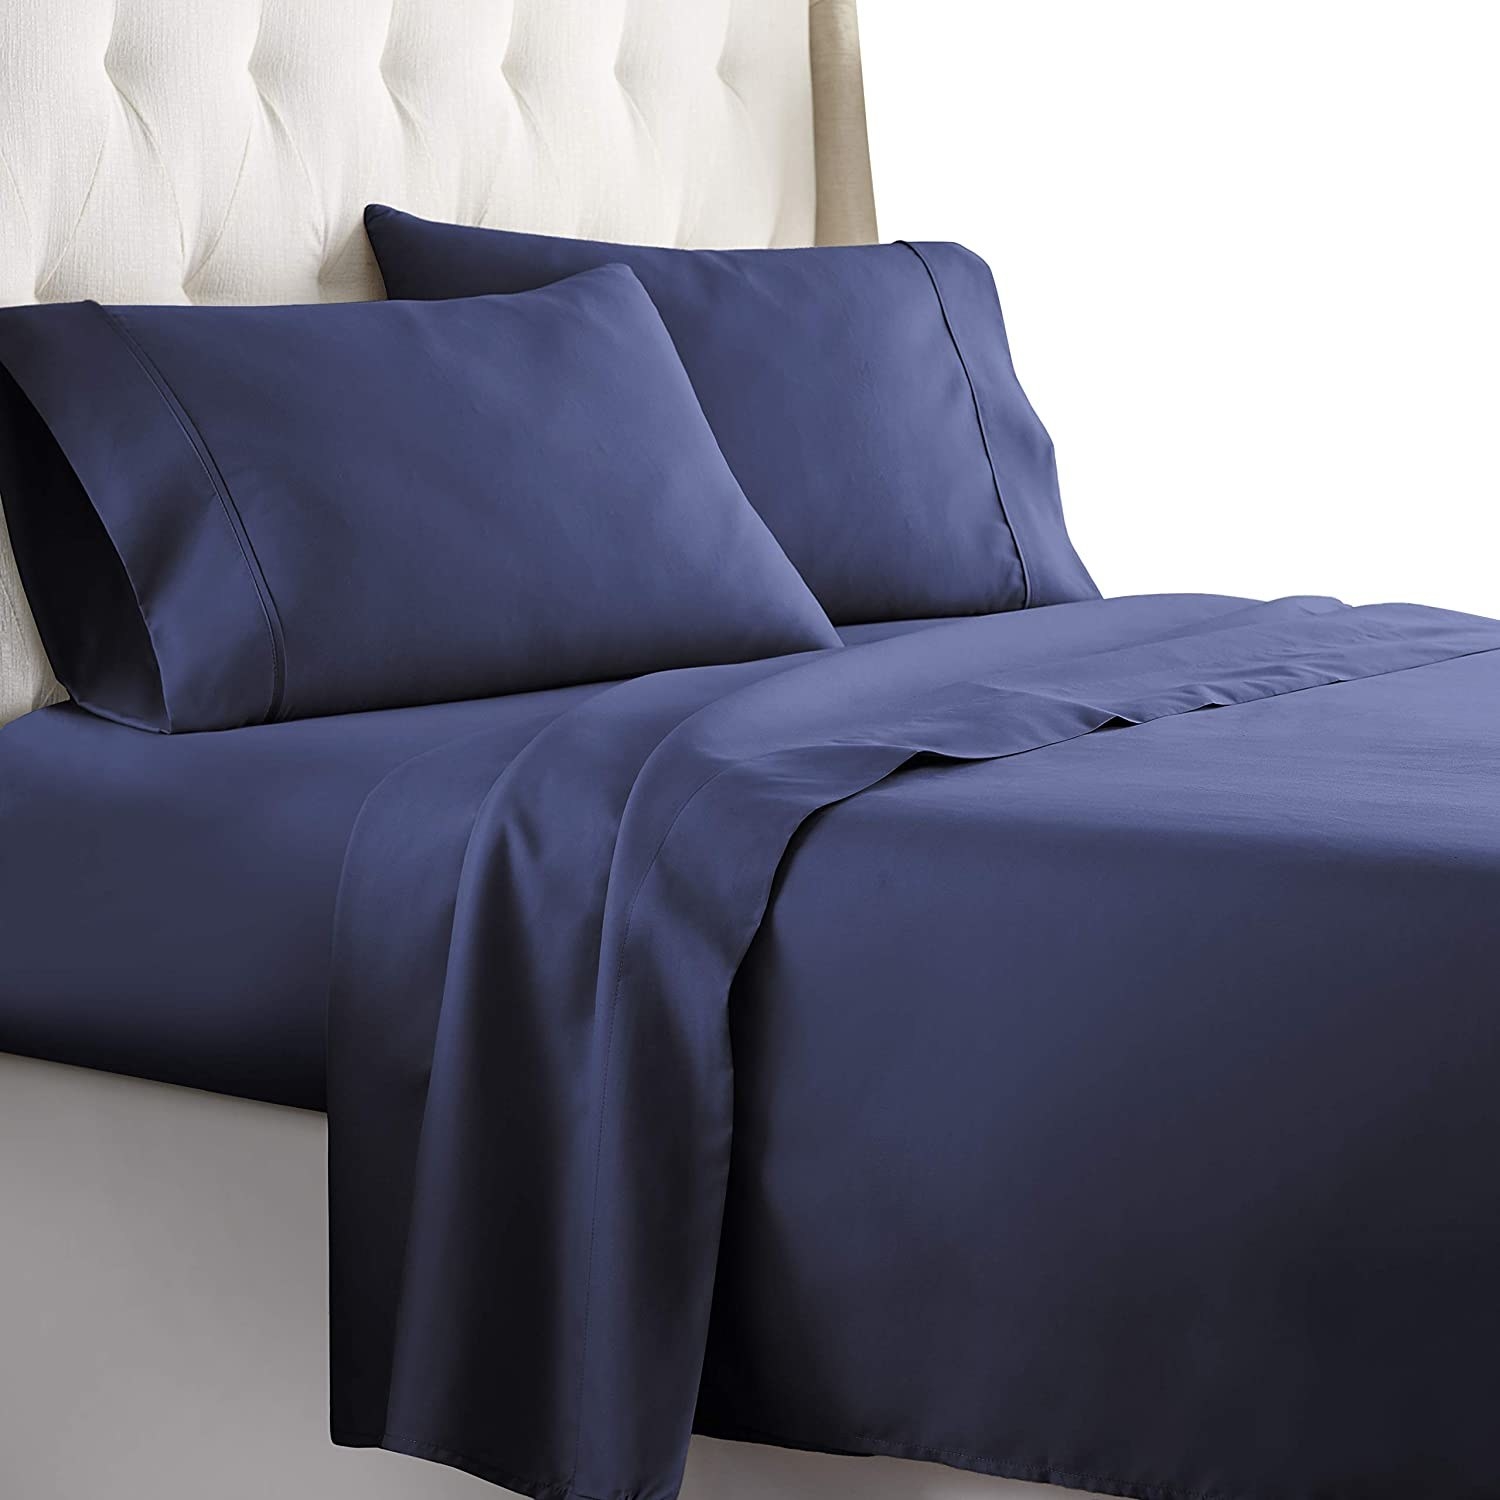 dark blue sheets and pillowcases on a bed